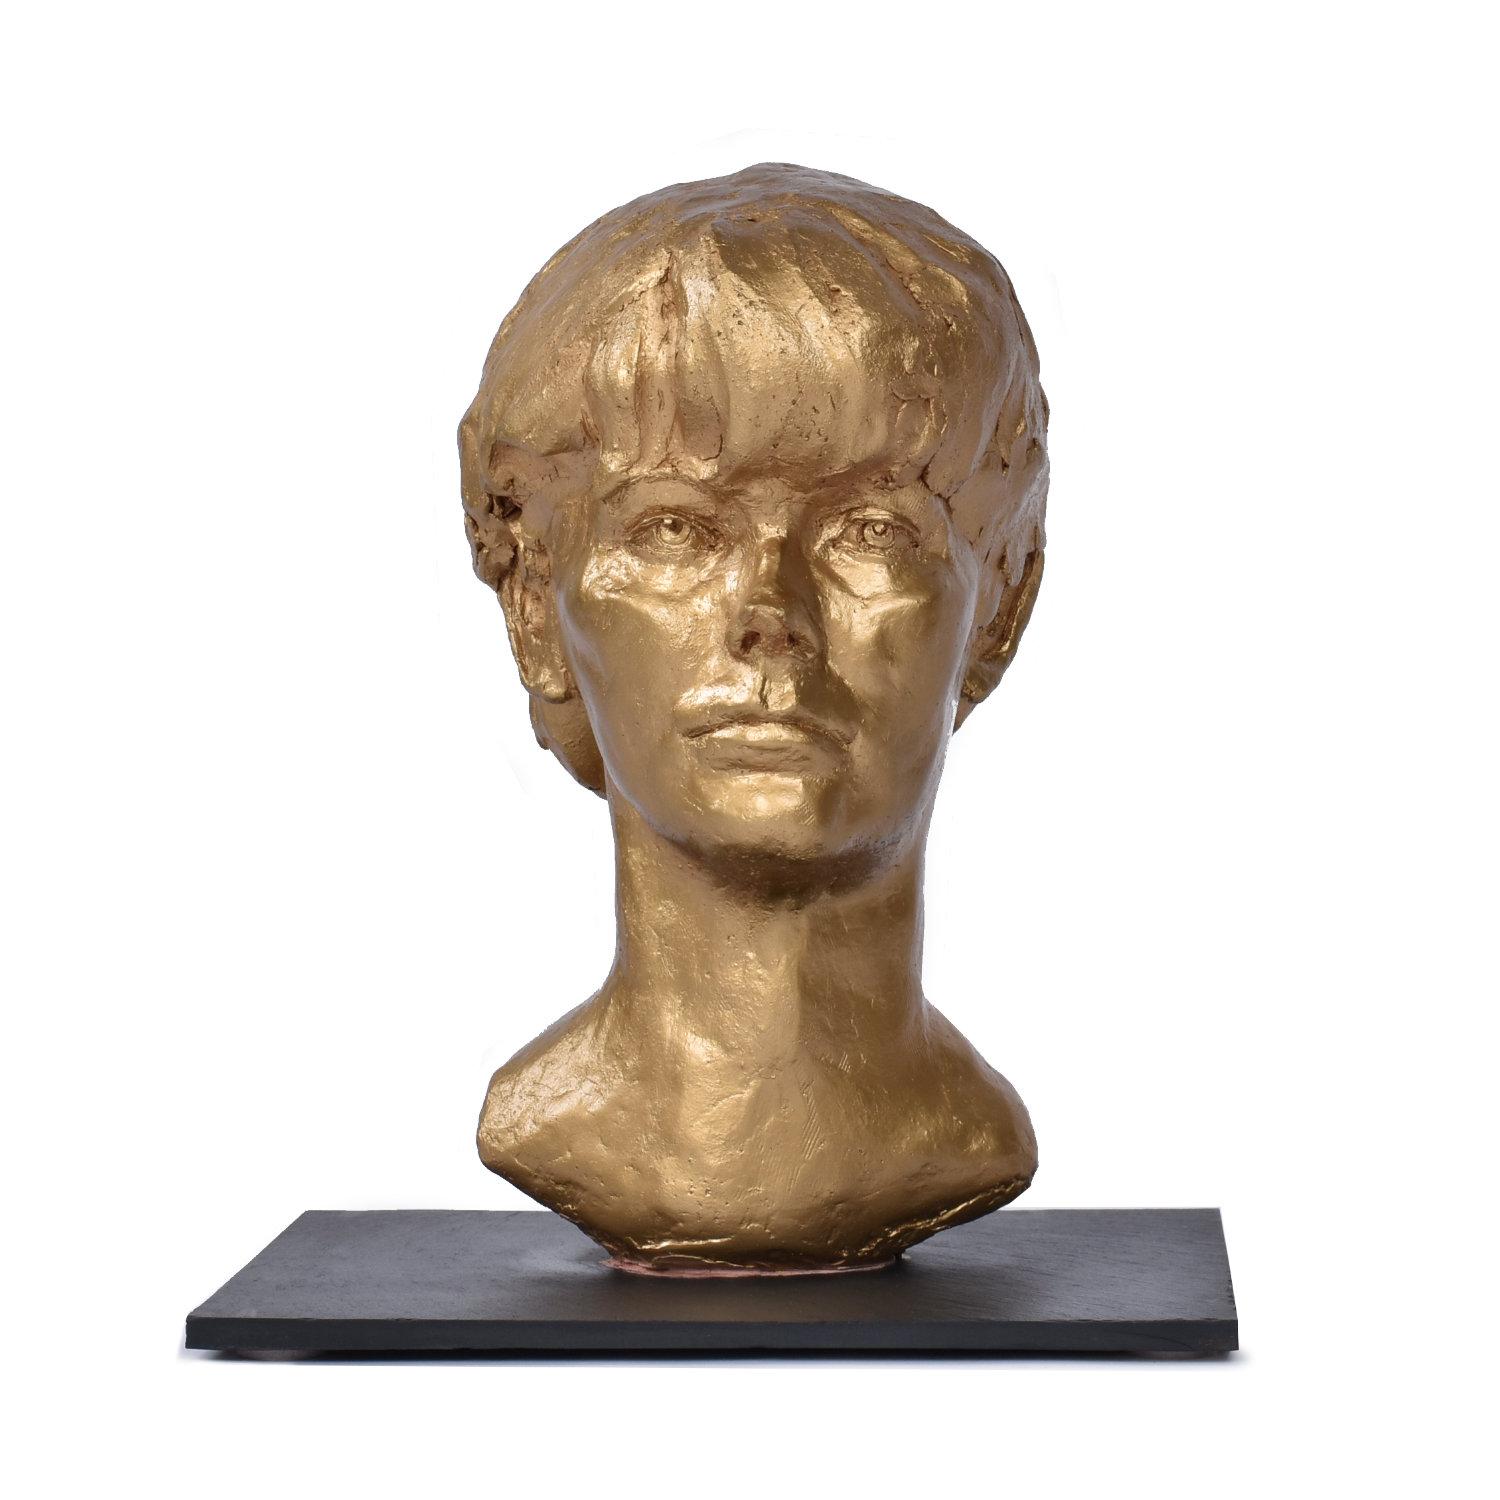 This listing is for the bust alone. The marble pedestal is sold separately.

Hand crafted bust of a young boy, signed “Sendelbach.” The sculpture is crafted from clay and finished in gold paint. The piece is mounted to a slate pedestal. Artist